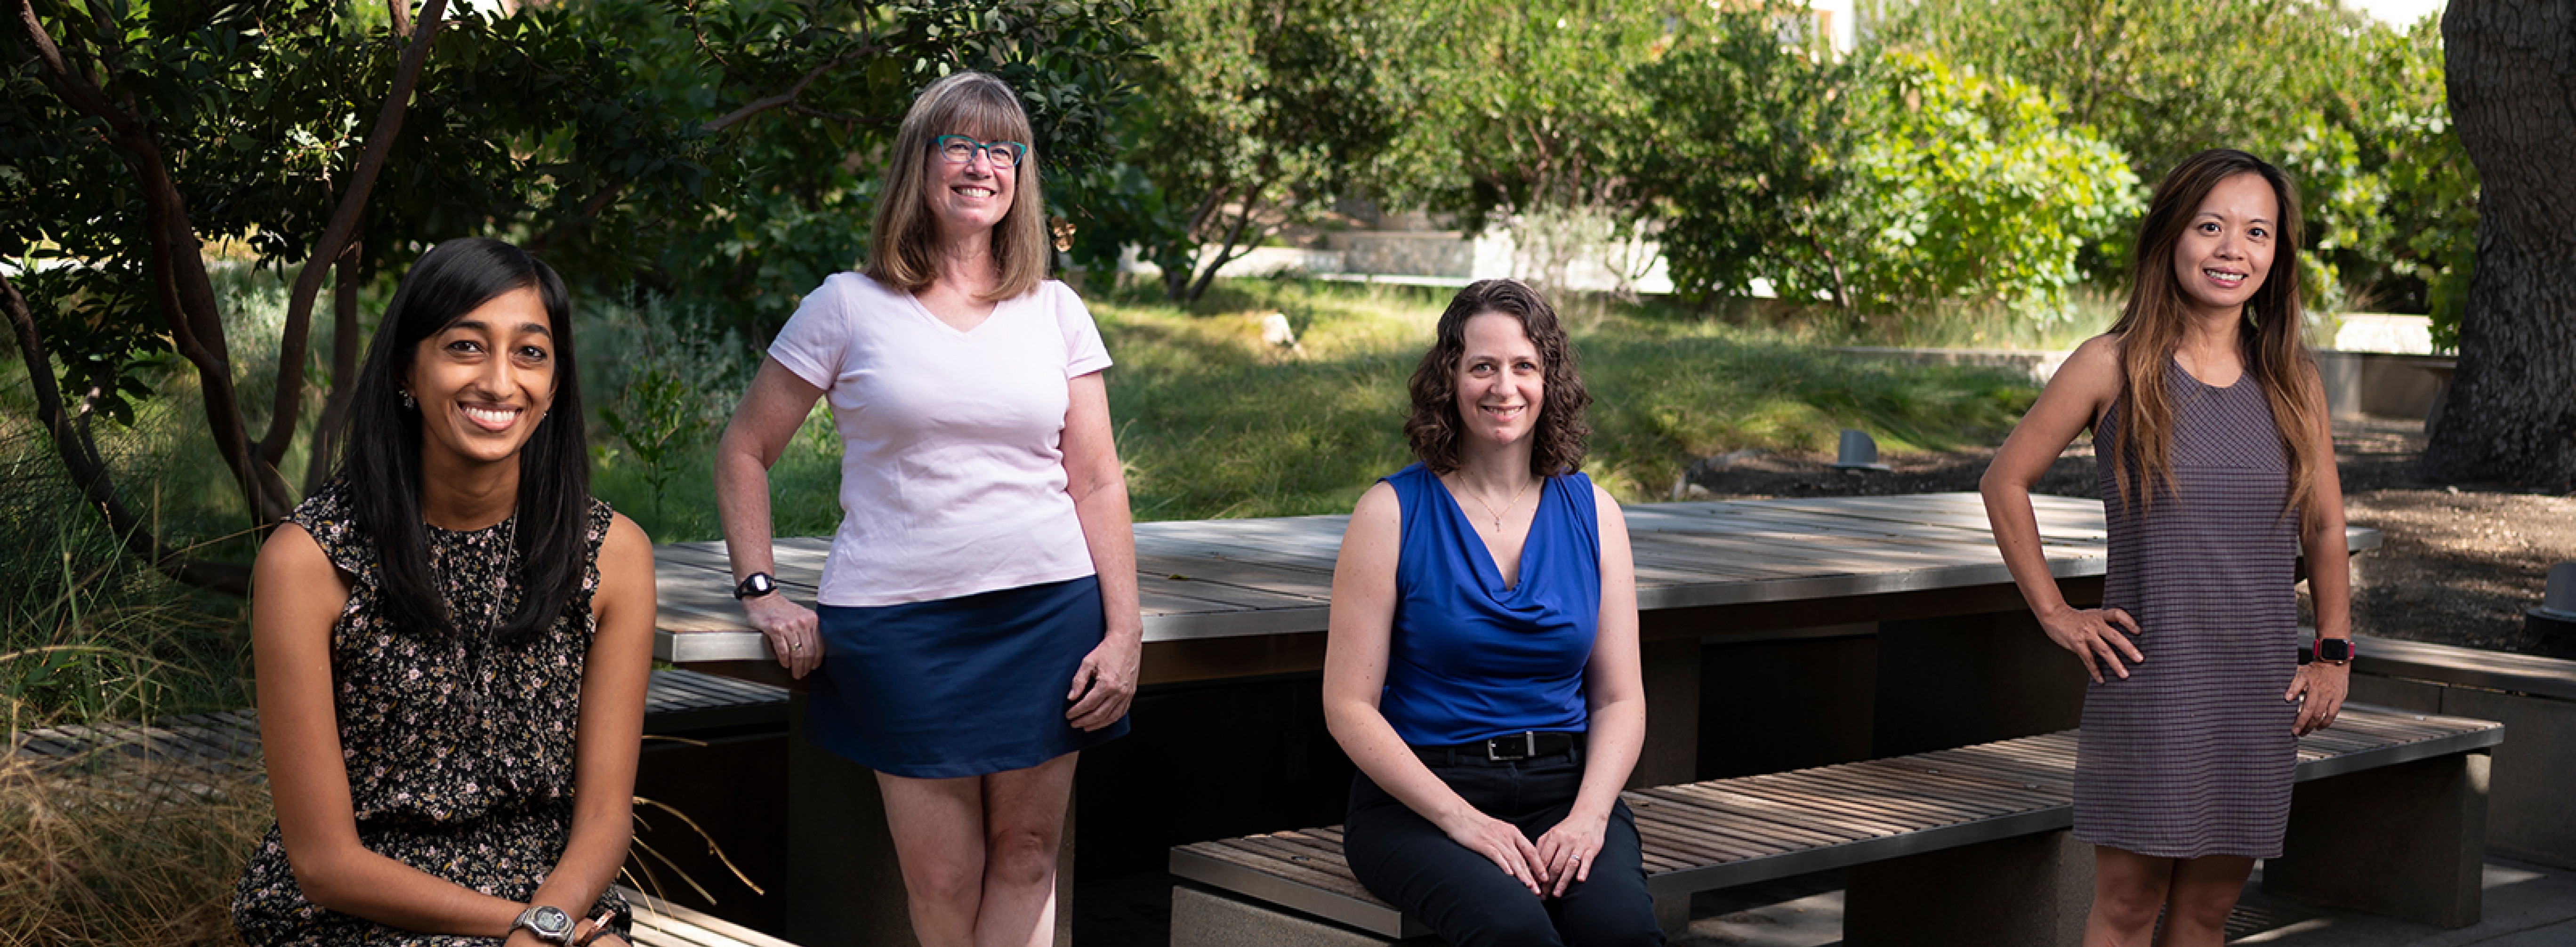 Four faculty celebrate grants for research in emotions, memory, body language, and preparing undergrads for STEM research.